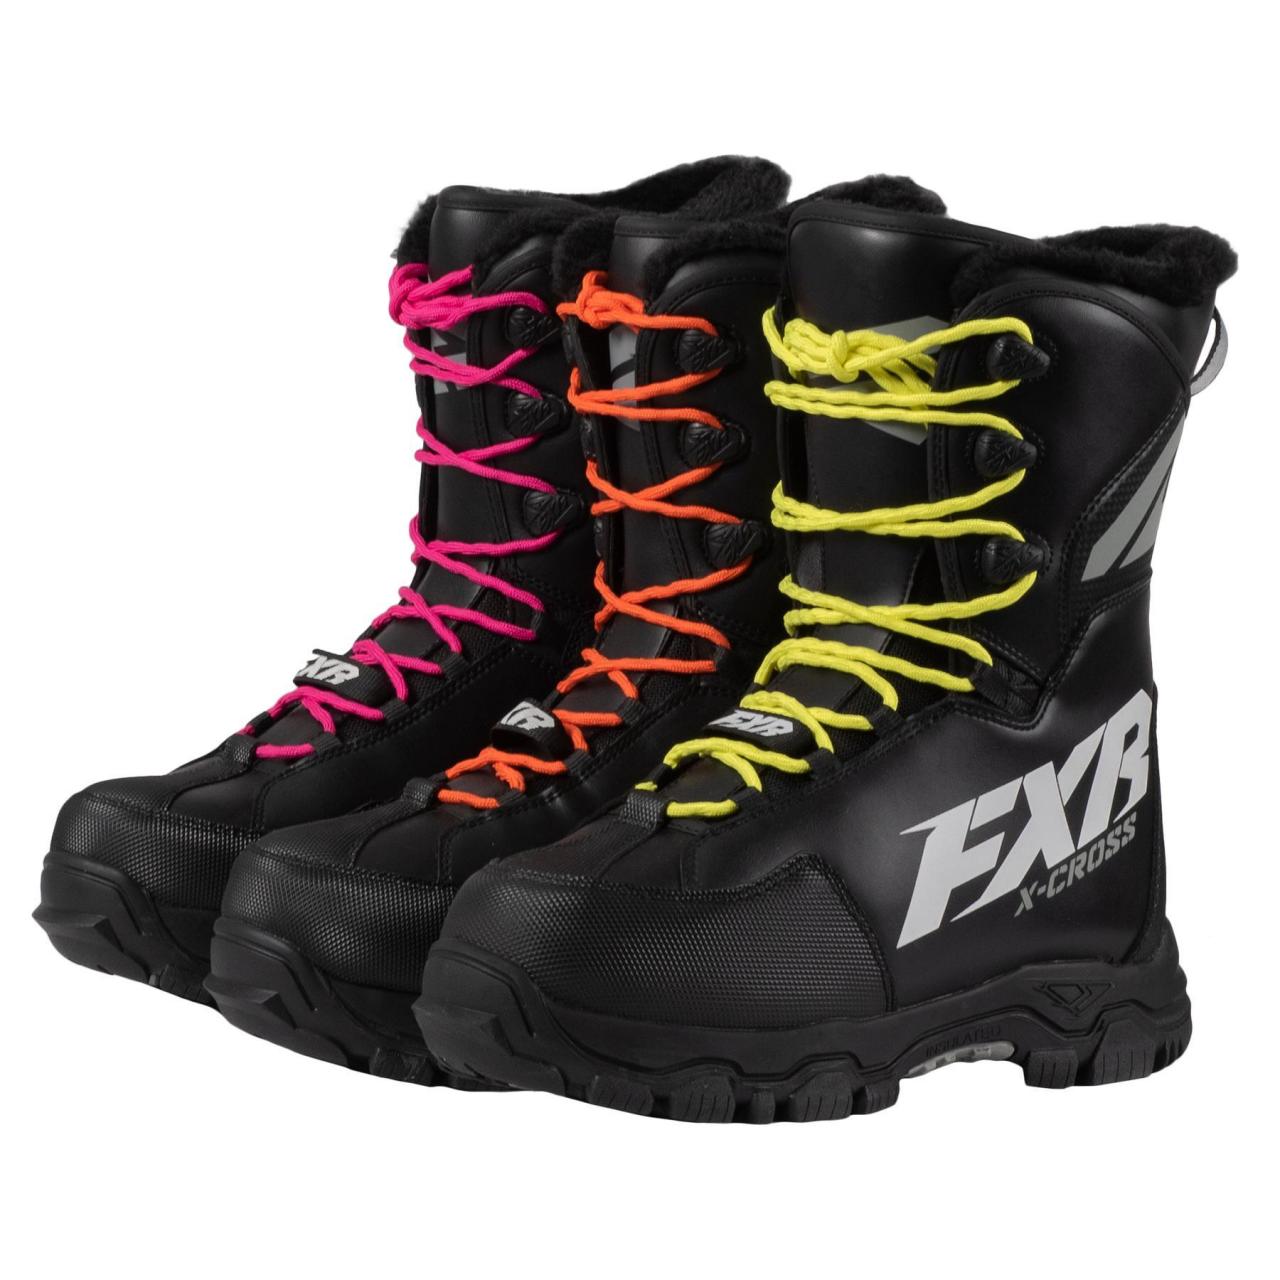 Fxr X Cross Boots Canada Top Sellers, UP TO 66% OFF